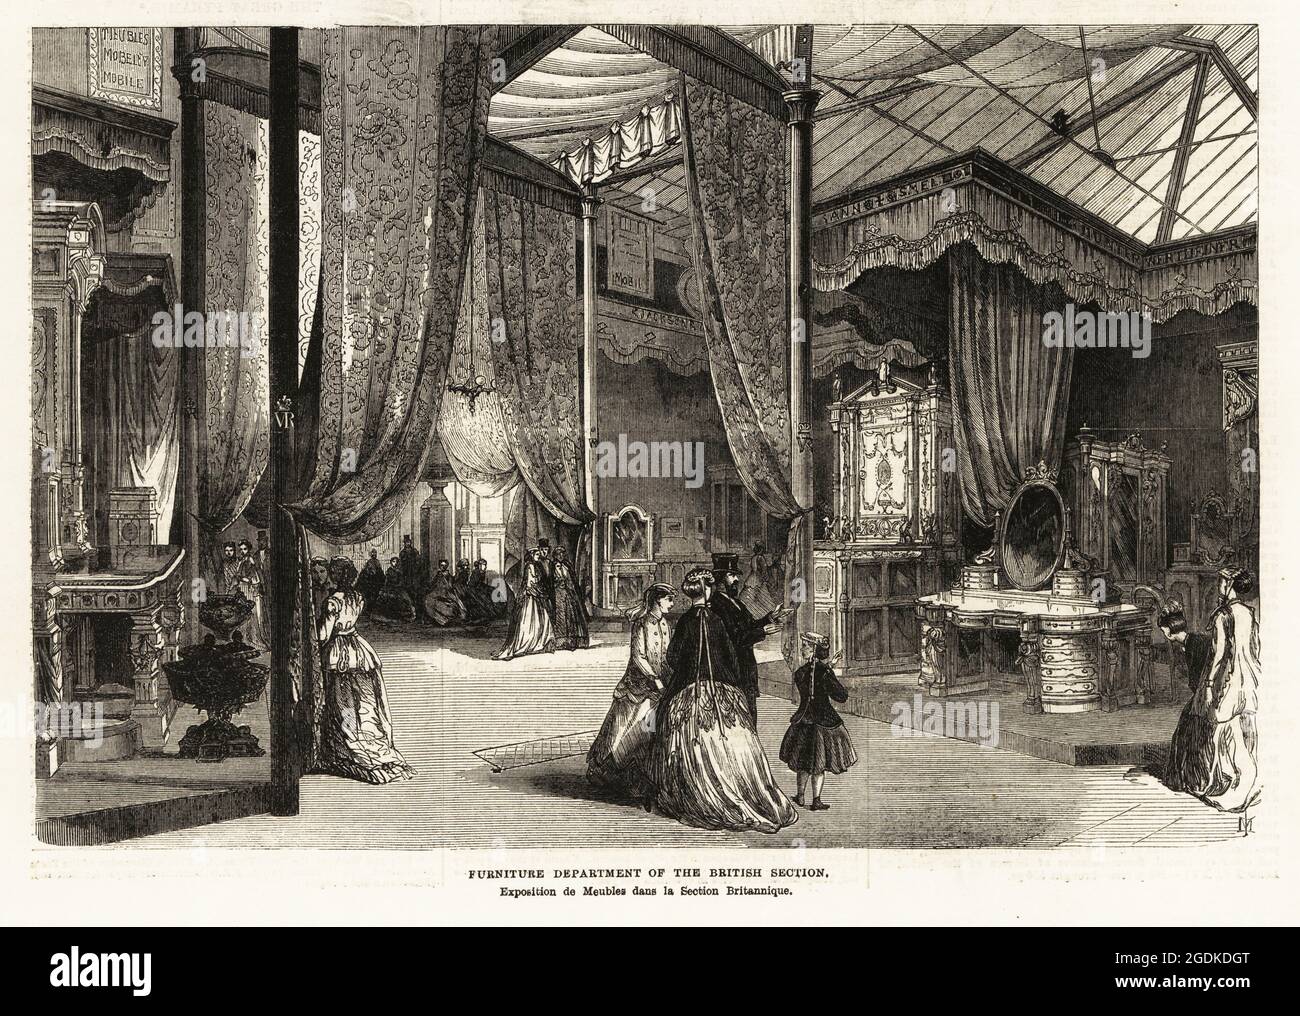 Visitors look at massive Gothic dressing tables, canopy beds and drapes manufactured by cabinetmakers Jackson and Graham in the Furniture Department of the British Section, Paris Exposition Universelle, 1867. Woodcut engraving by JM from the Supplement to the Illustrated London News, London, June 8, 1867. Stock Photo